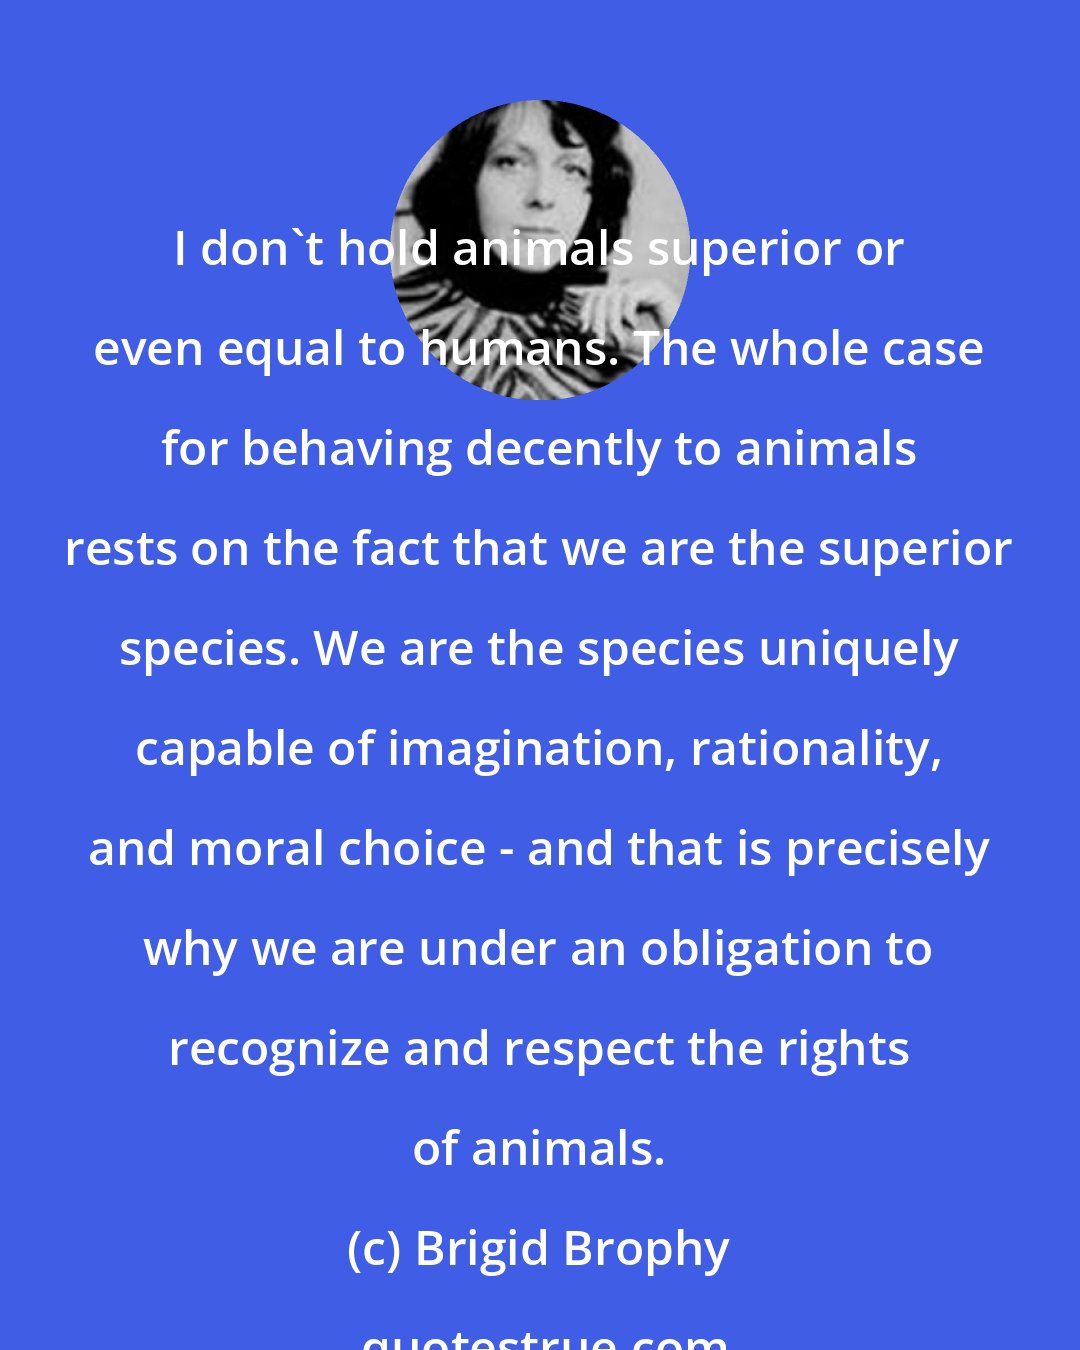 Brigid Brophy: I don't hold animals superior or even equal to humans. The whole case for behaving decently to animals rests on the fact that we are the superior species. We are the species uniquely capable of imagination, rationality, and moral choice - and that is precisely why we are under an obligation to recognize and respect the rights of animals.